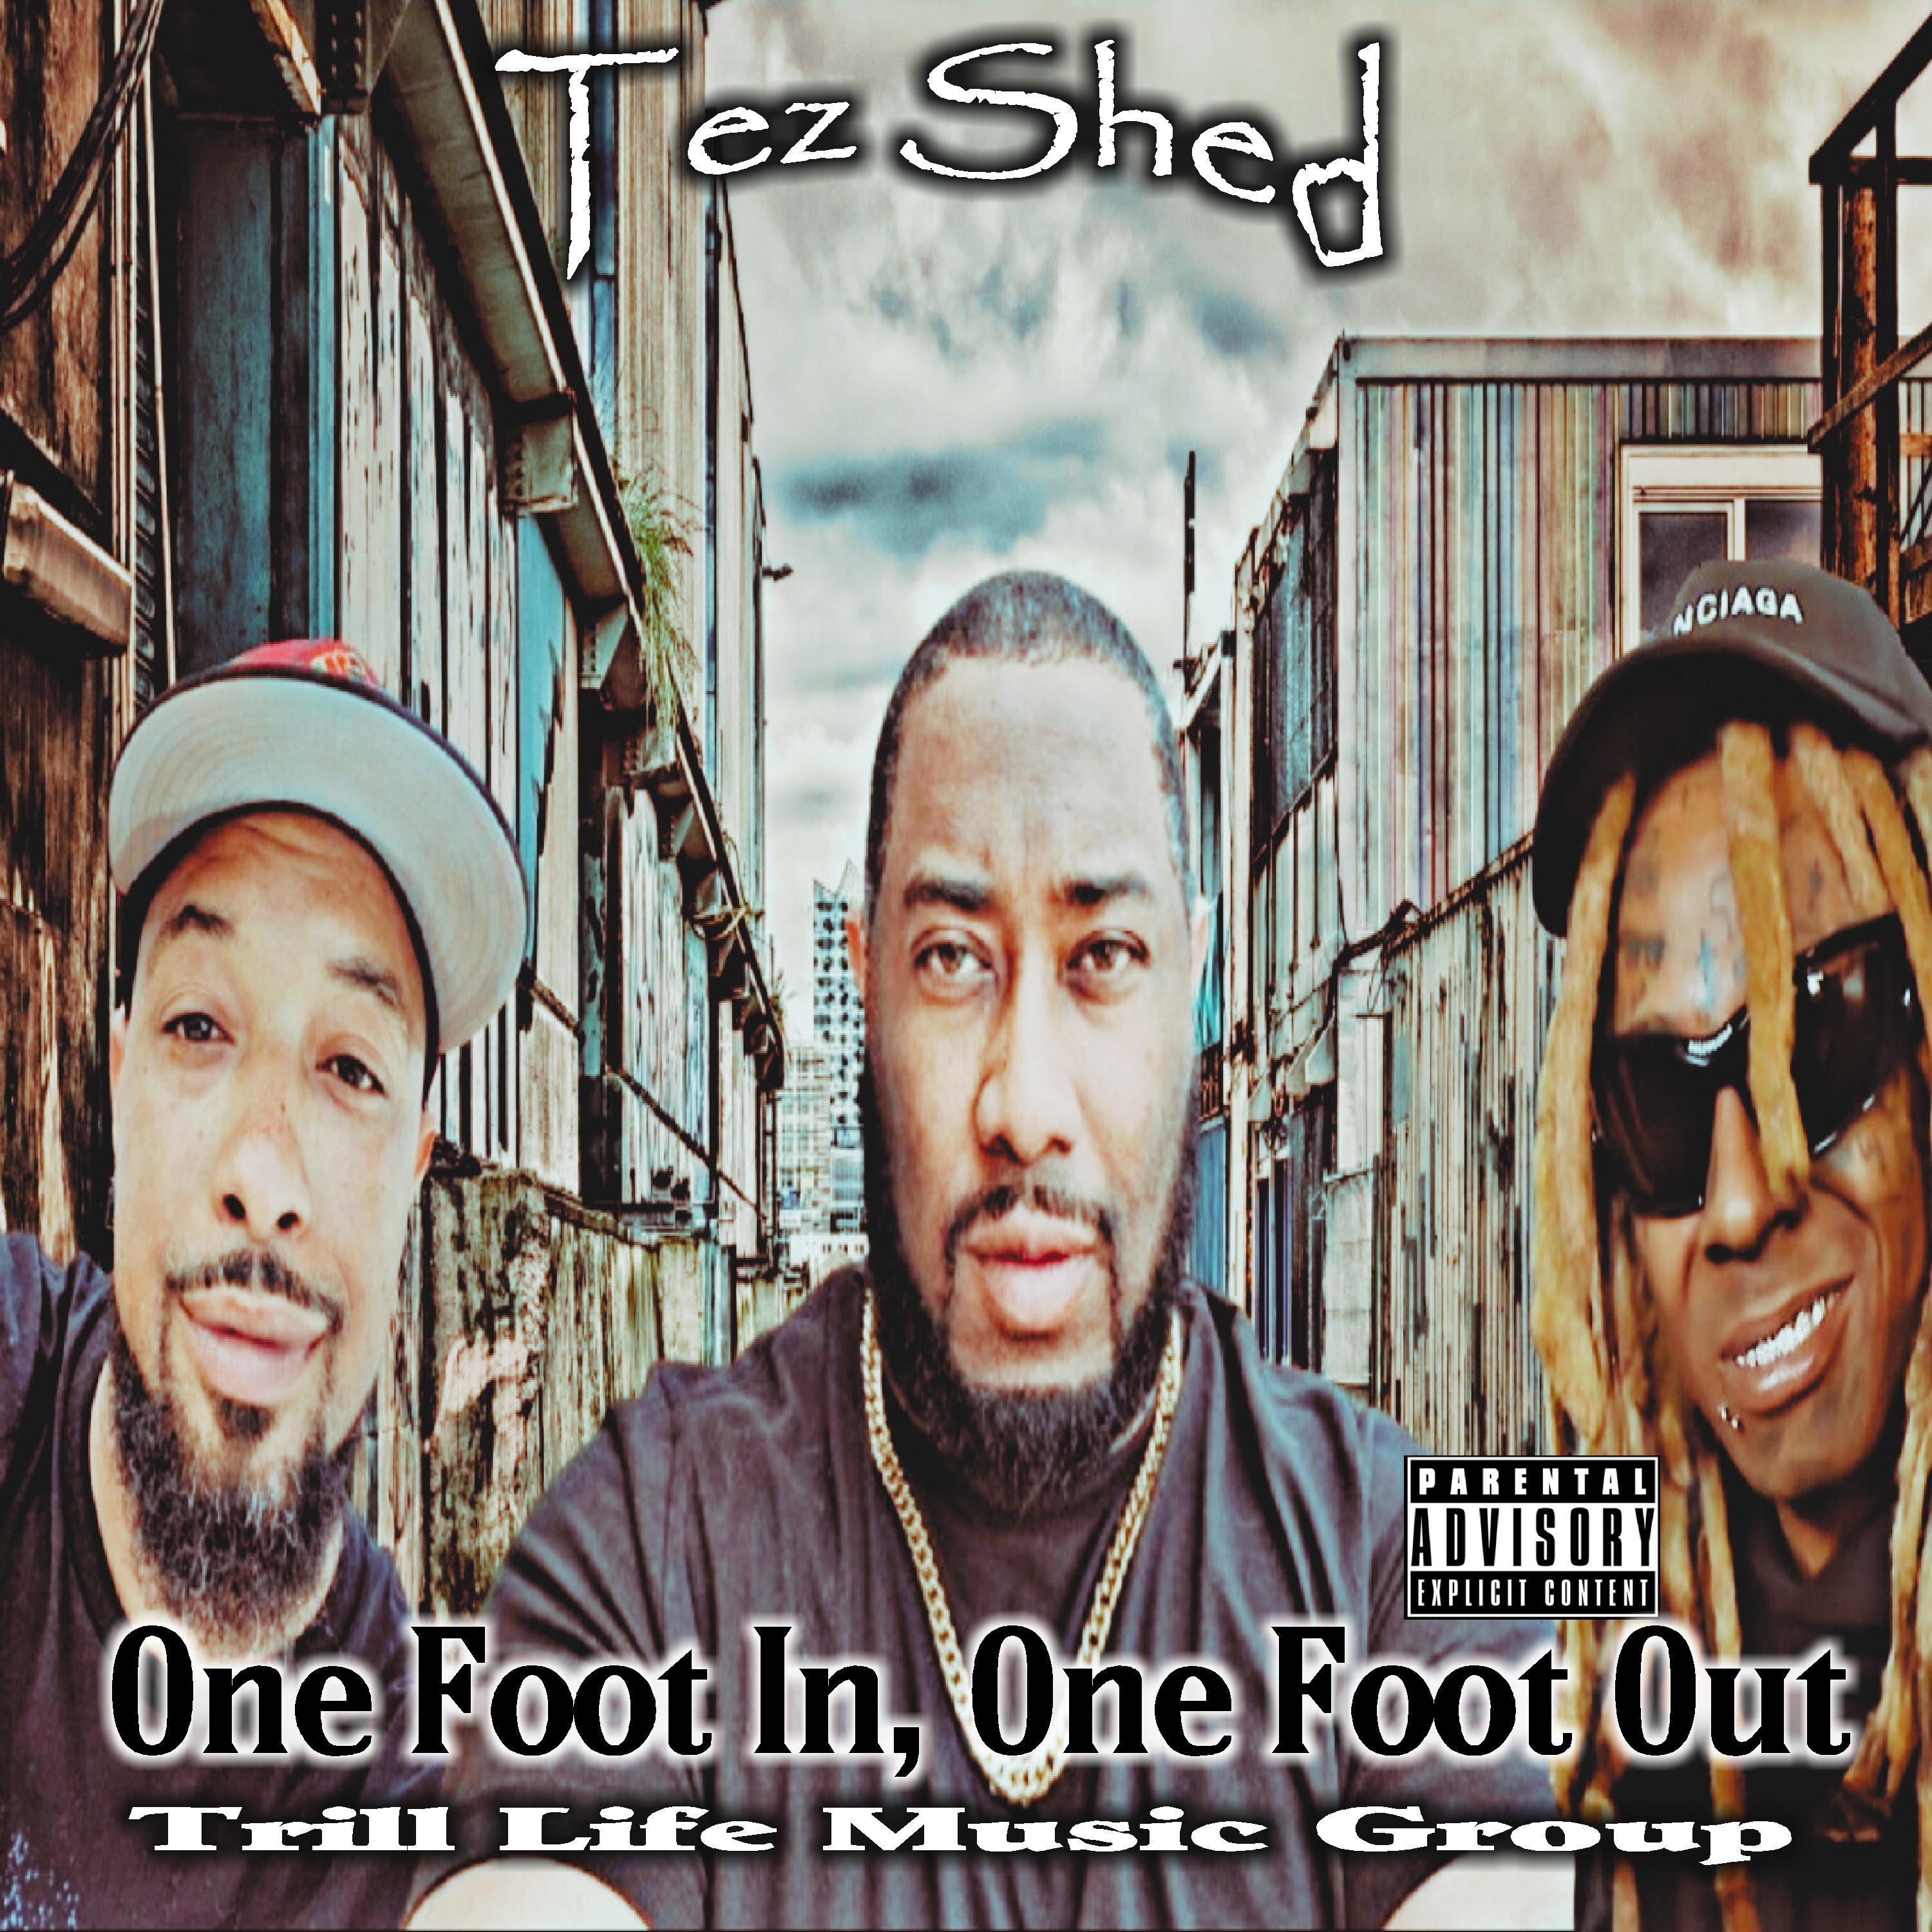 Tez Shed - One Foot In, One Foot Out (feat. Lil Wayne & Dino Rashad) (Mastered Version)